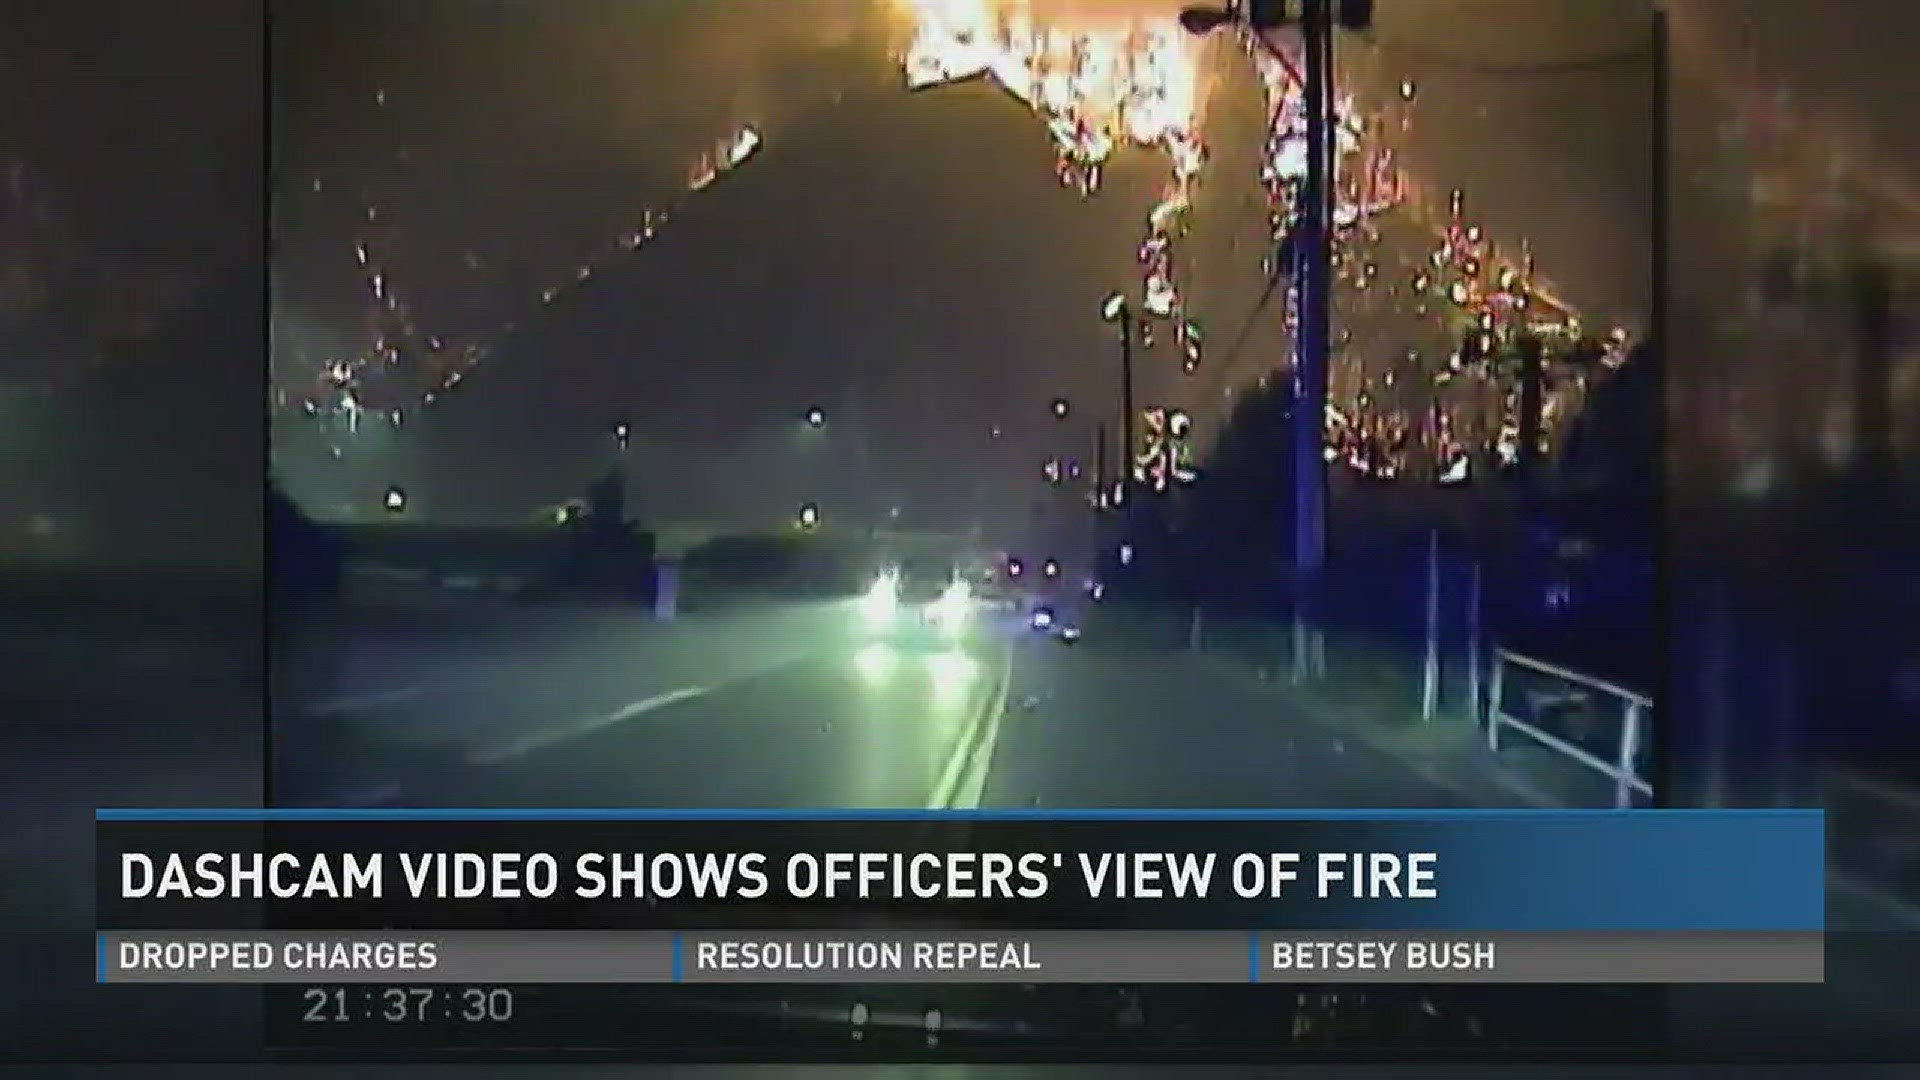 July 3, 2017: Dashcam video shows a first-hand look at what first responders saw the night fire engulfed thousands of acres in Sevier County.